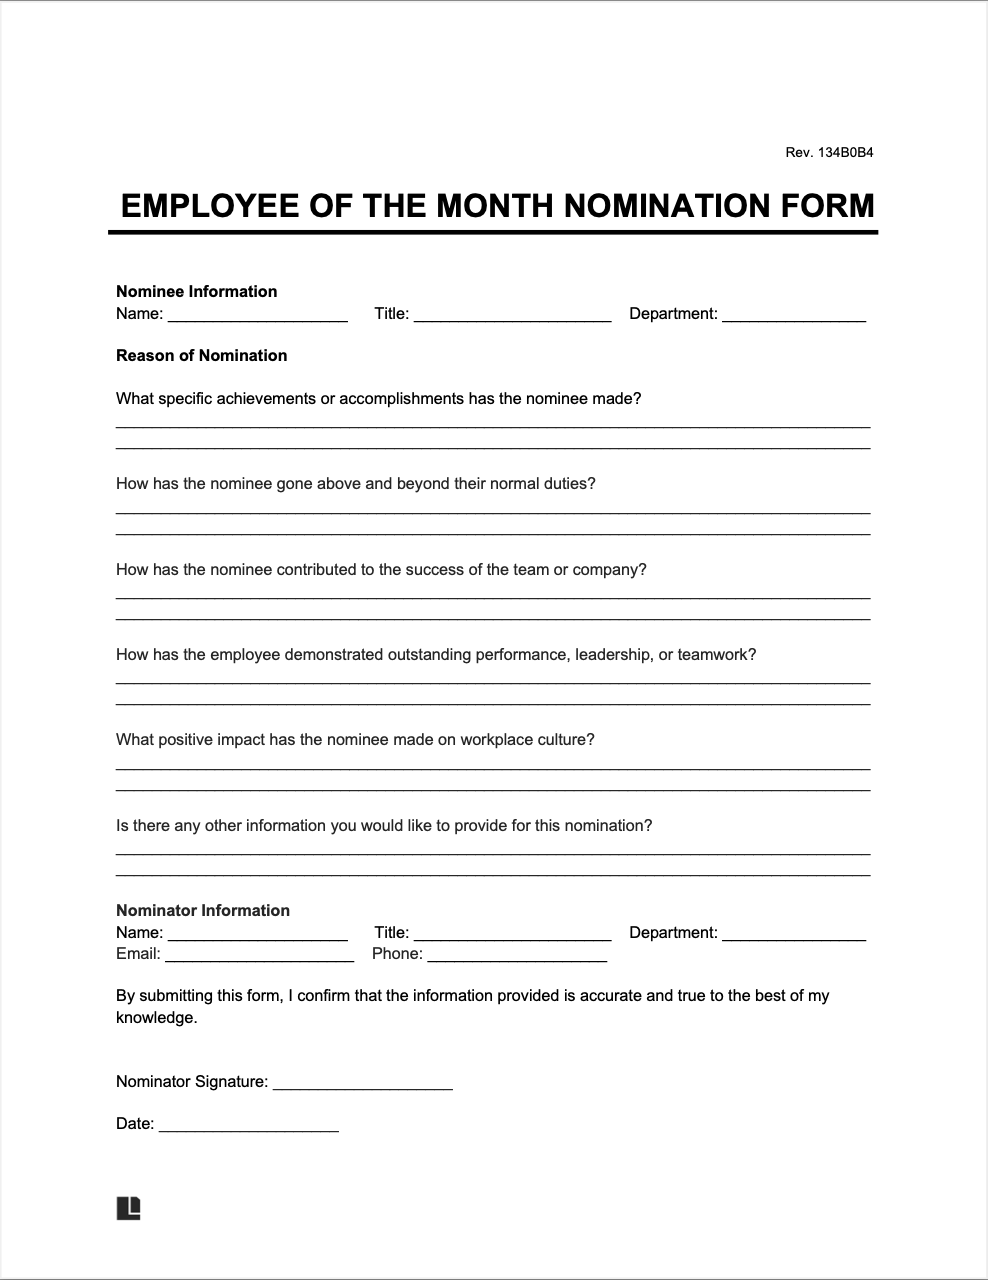 Employee of the Month Nomination Form screenshot